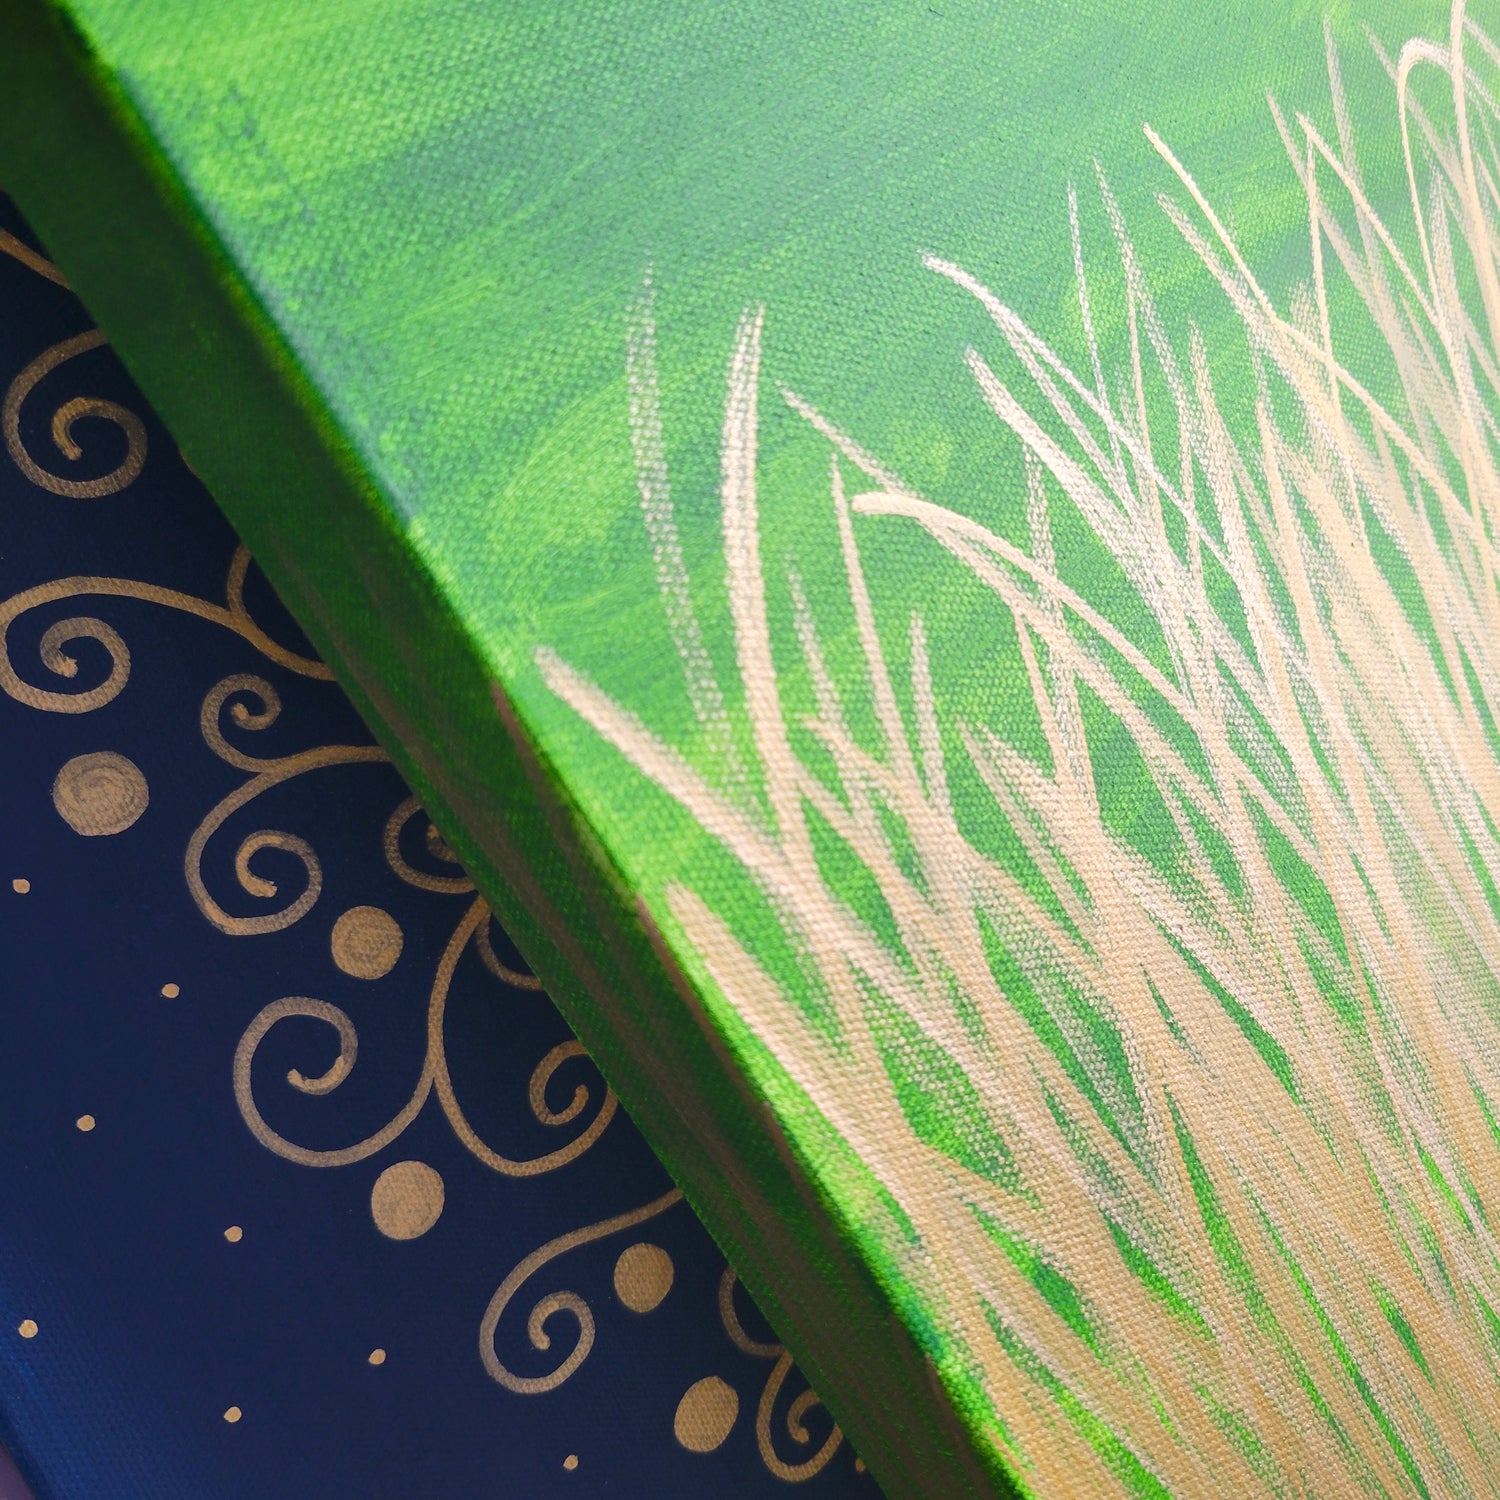 Close up view of two painted canvases to show gold highlights in artwork